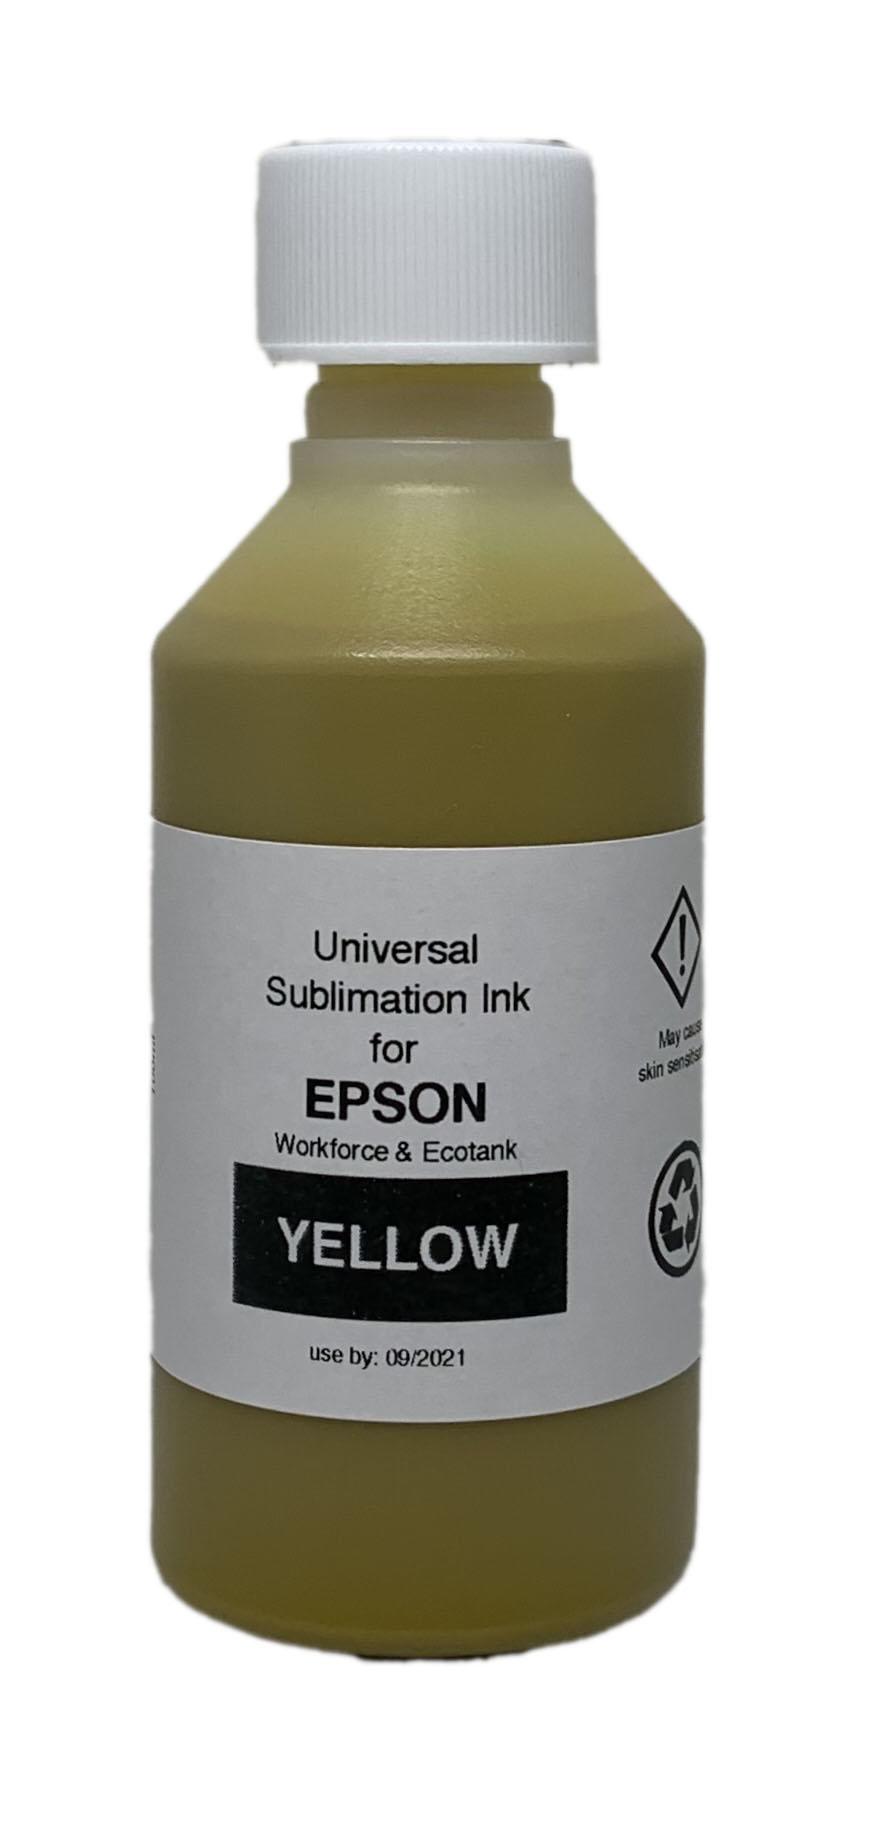 enore SFE sublimation ink yellow